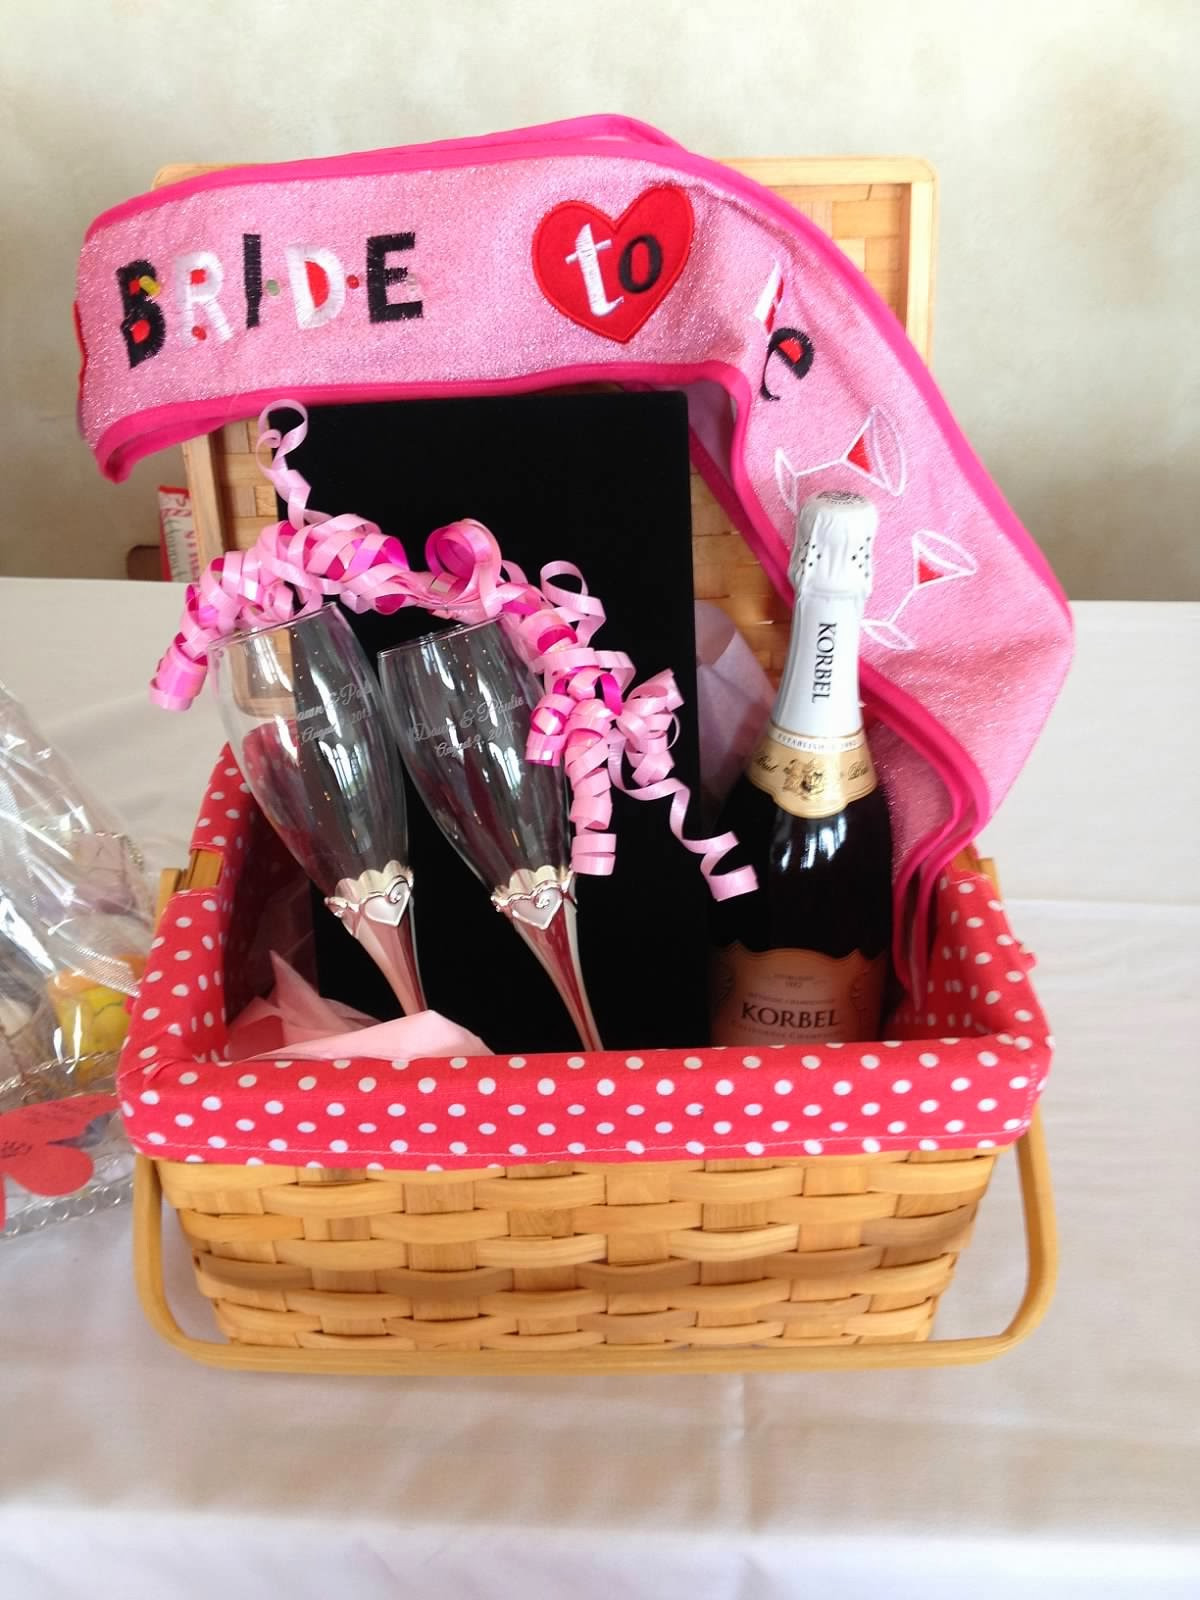 Bridal Shower Gift Basket Ideas For Bride
 2 Girls 1 Year 730 Moments to Wedding Wednesdays